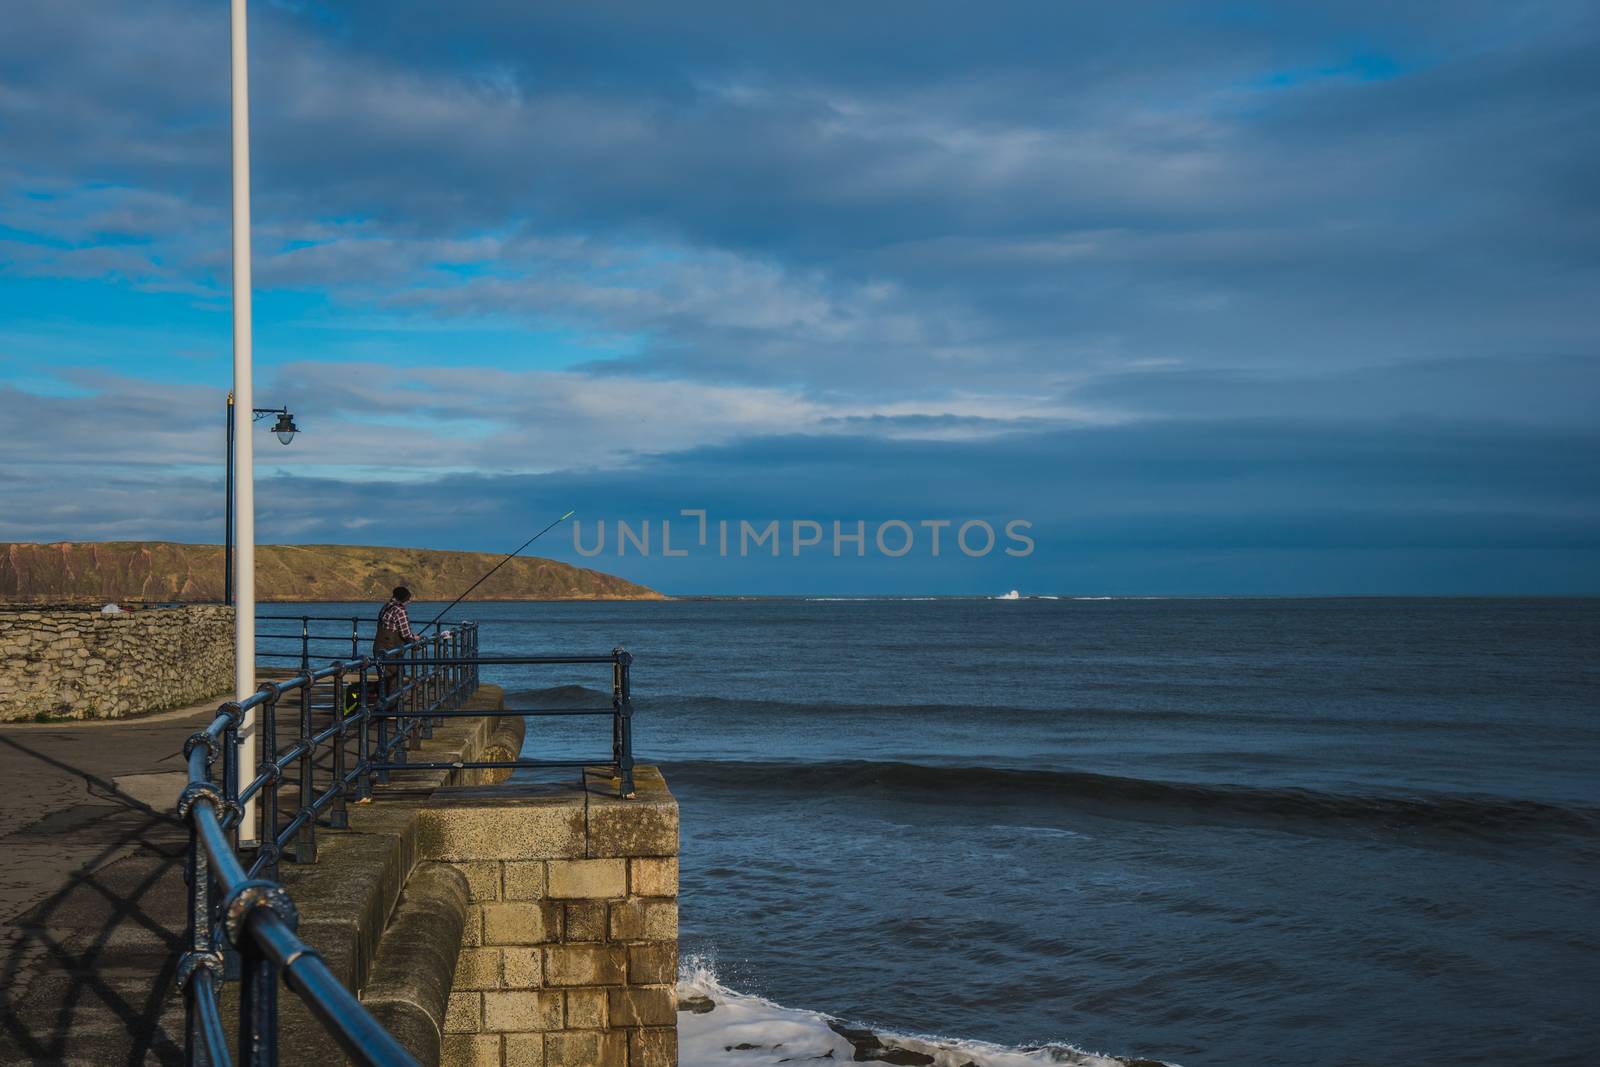 The promenade from a local seaside town in the north of England called Filey